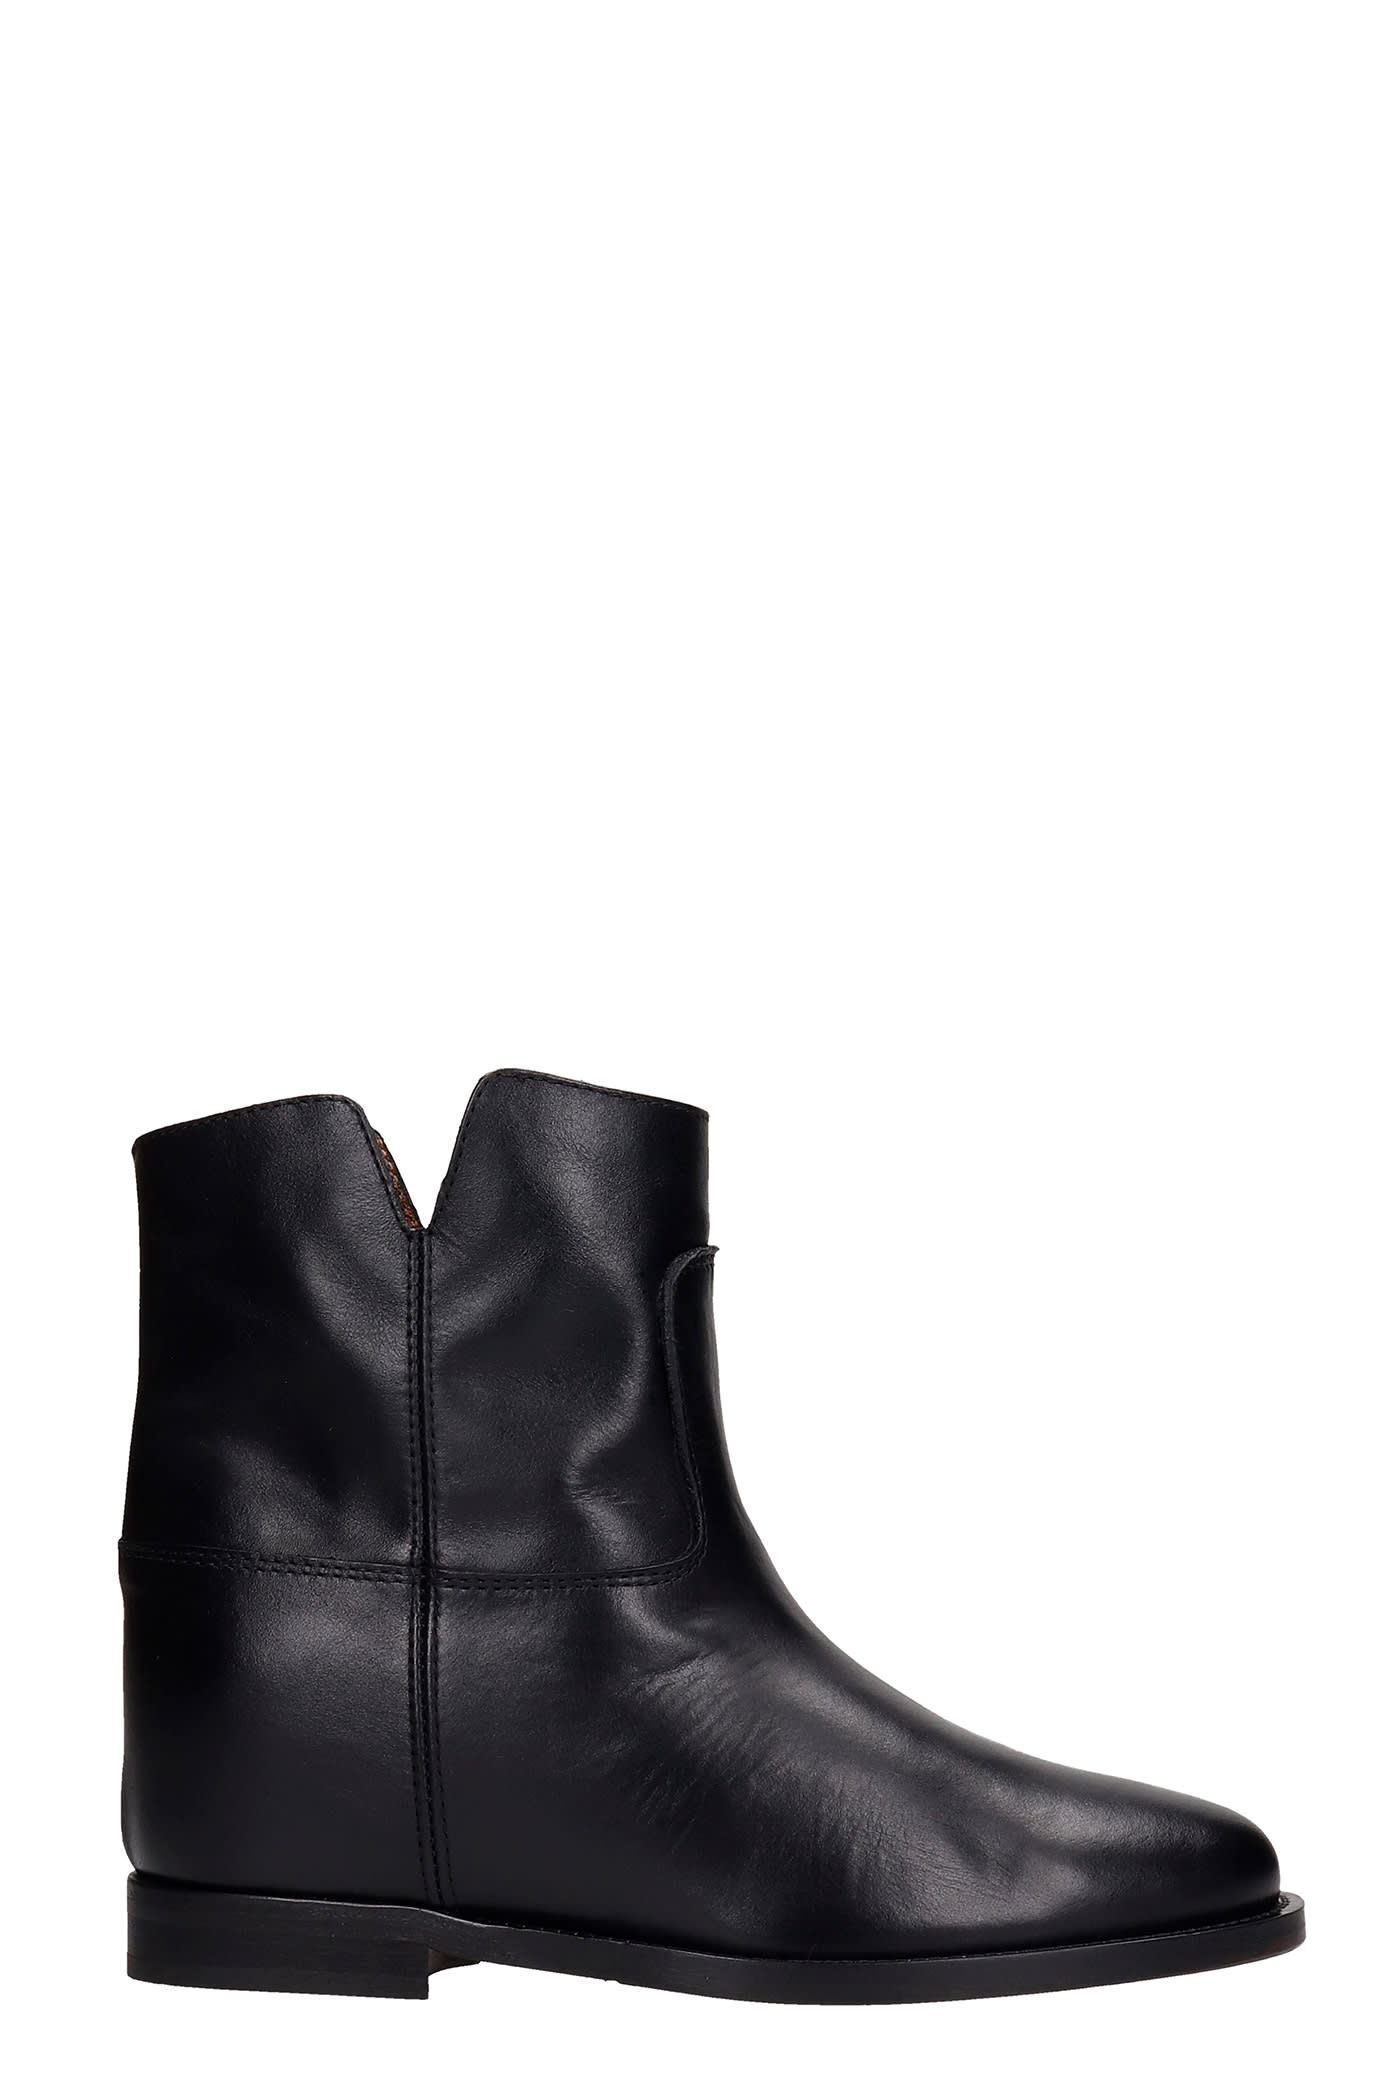 Via Roma 15 ANKEL BOOTS INSIDE WEDGE IN BLACK LEATHER